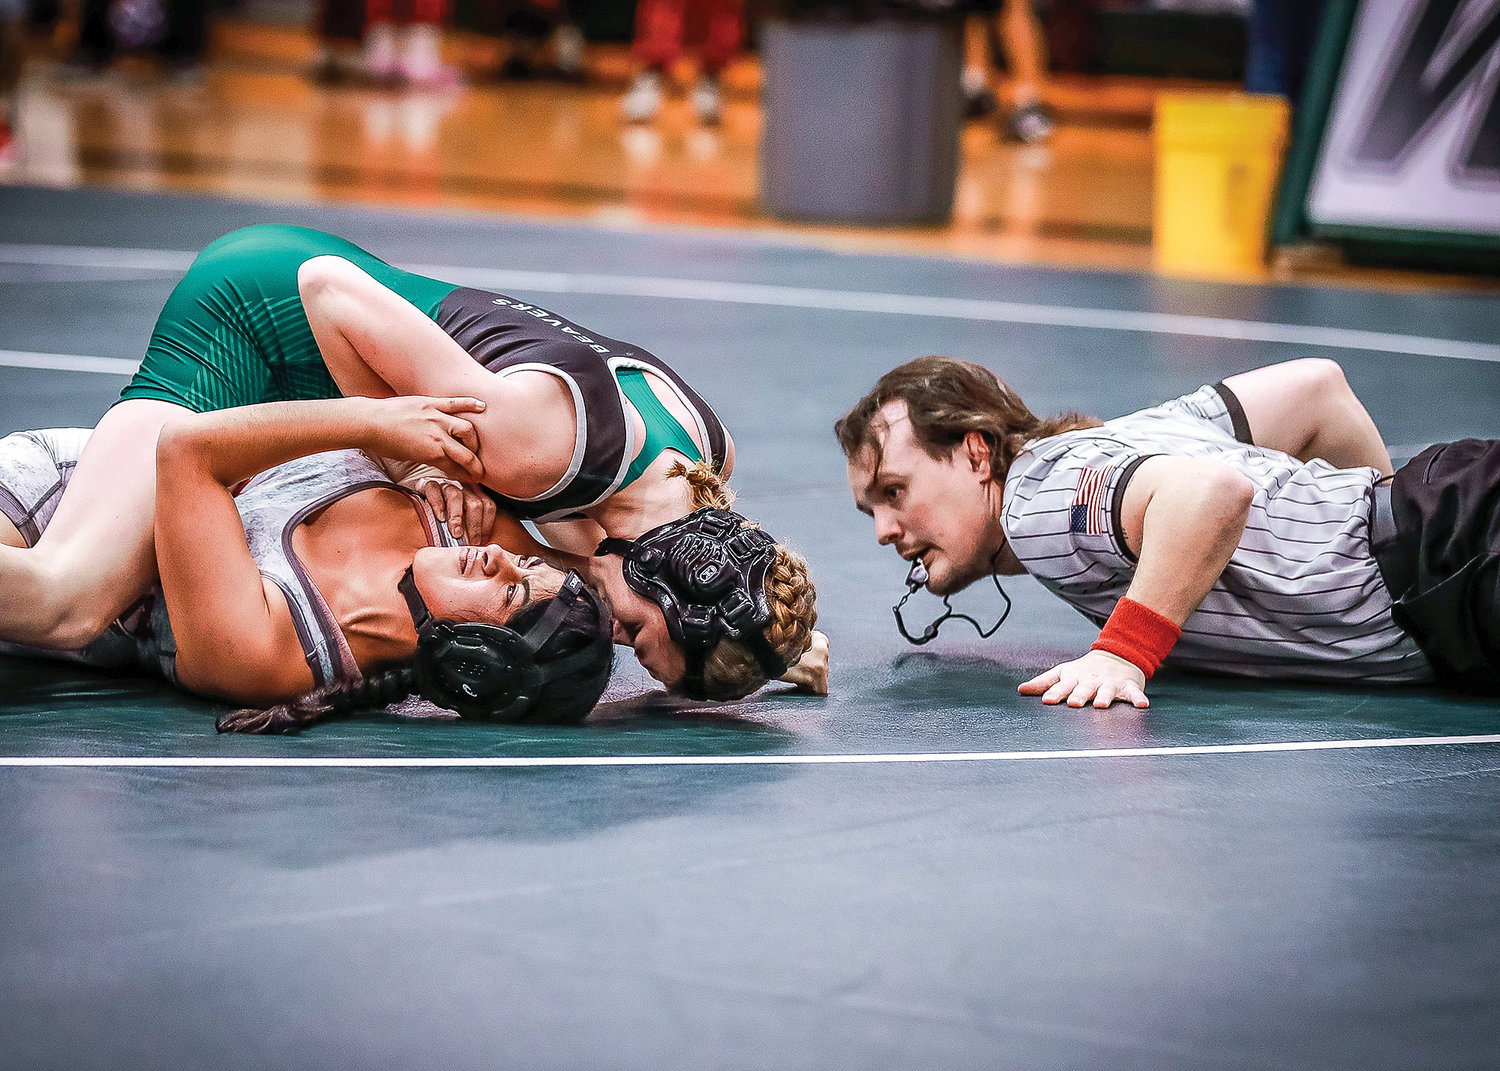 Couly McReynolds, a sophomore at Woodland High School, pins her Fort Vancouver opponent in just 56 seconds of the first round during a home meet on Wednesday, Jan. 11.